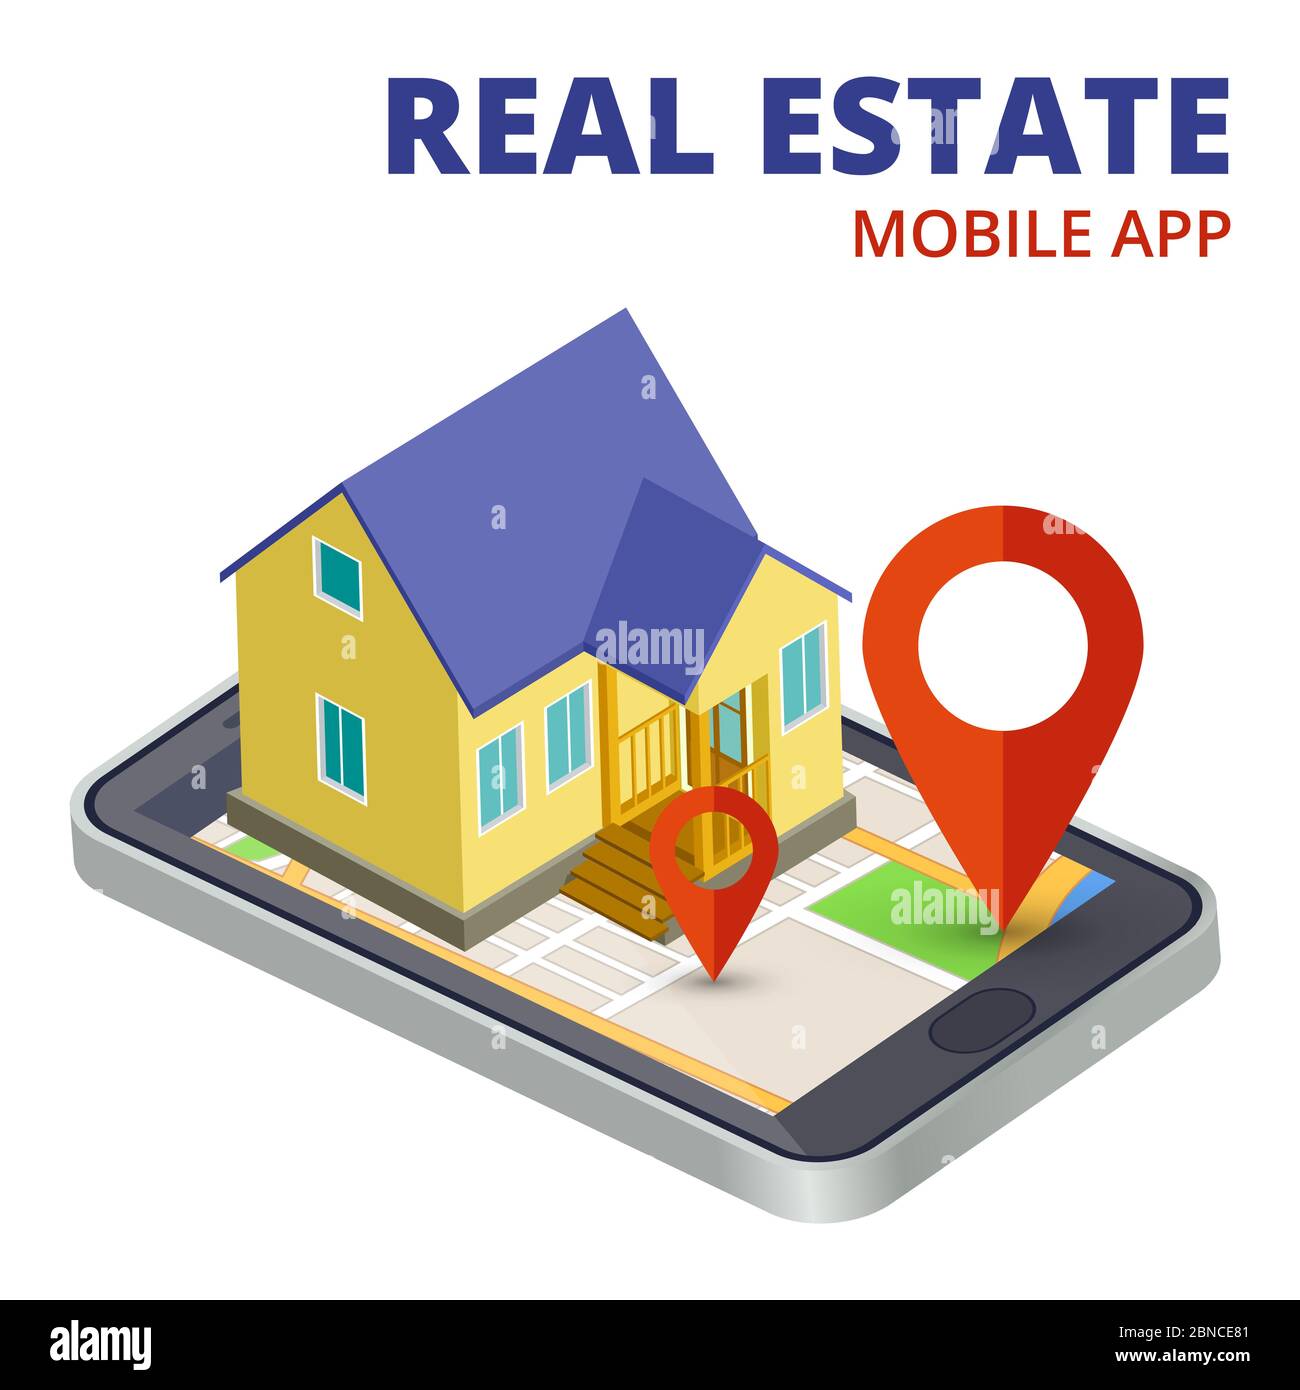 Isometric real estate mobile app with phone and 3d house vector. Illustration of real estate mobile app Stock Vector